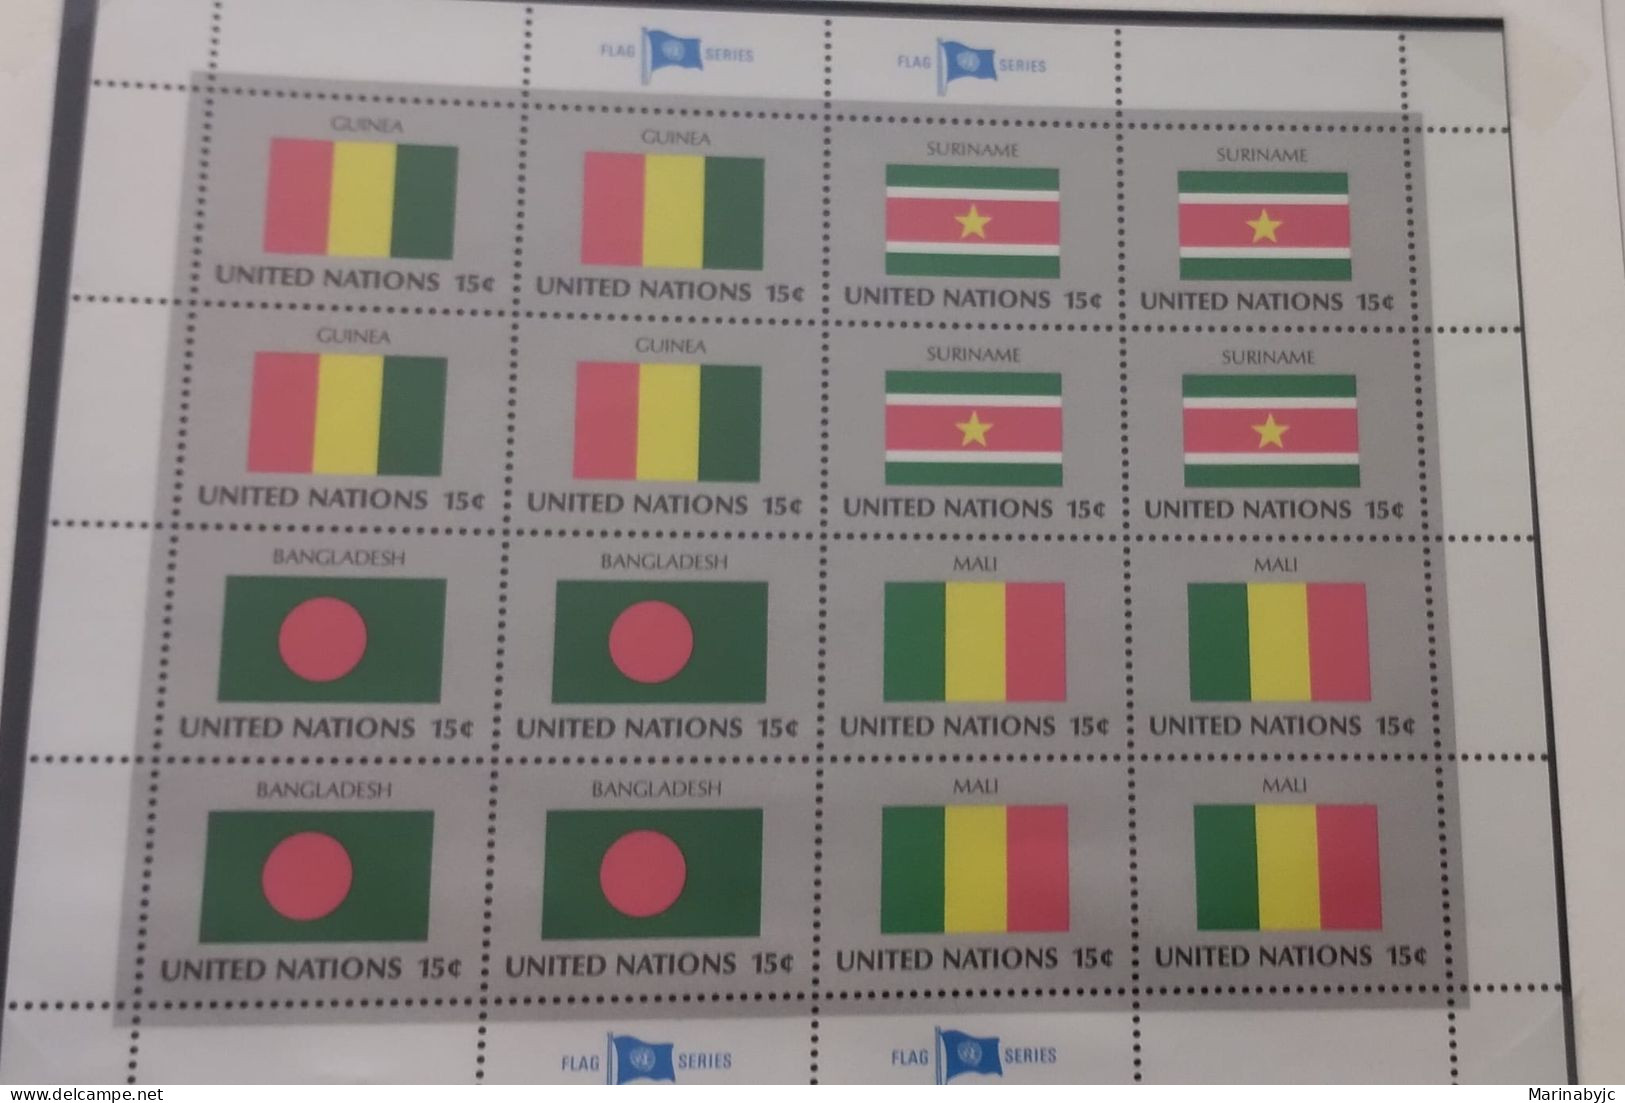 EL)1980 UNITED NATIONS, NATIONAL FLAG OF THE MEMBER COUNTRIES, GUINEA, SURINAME, BANGLADESH, MALI, UNICEF, MINISHEET OF - Unused Stamps